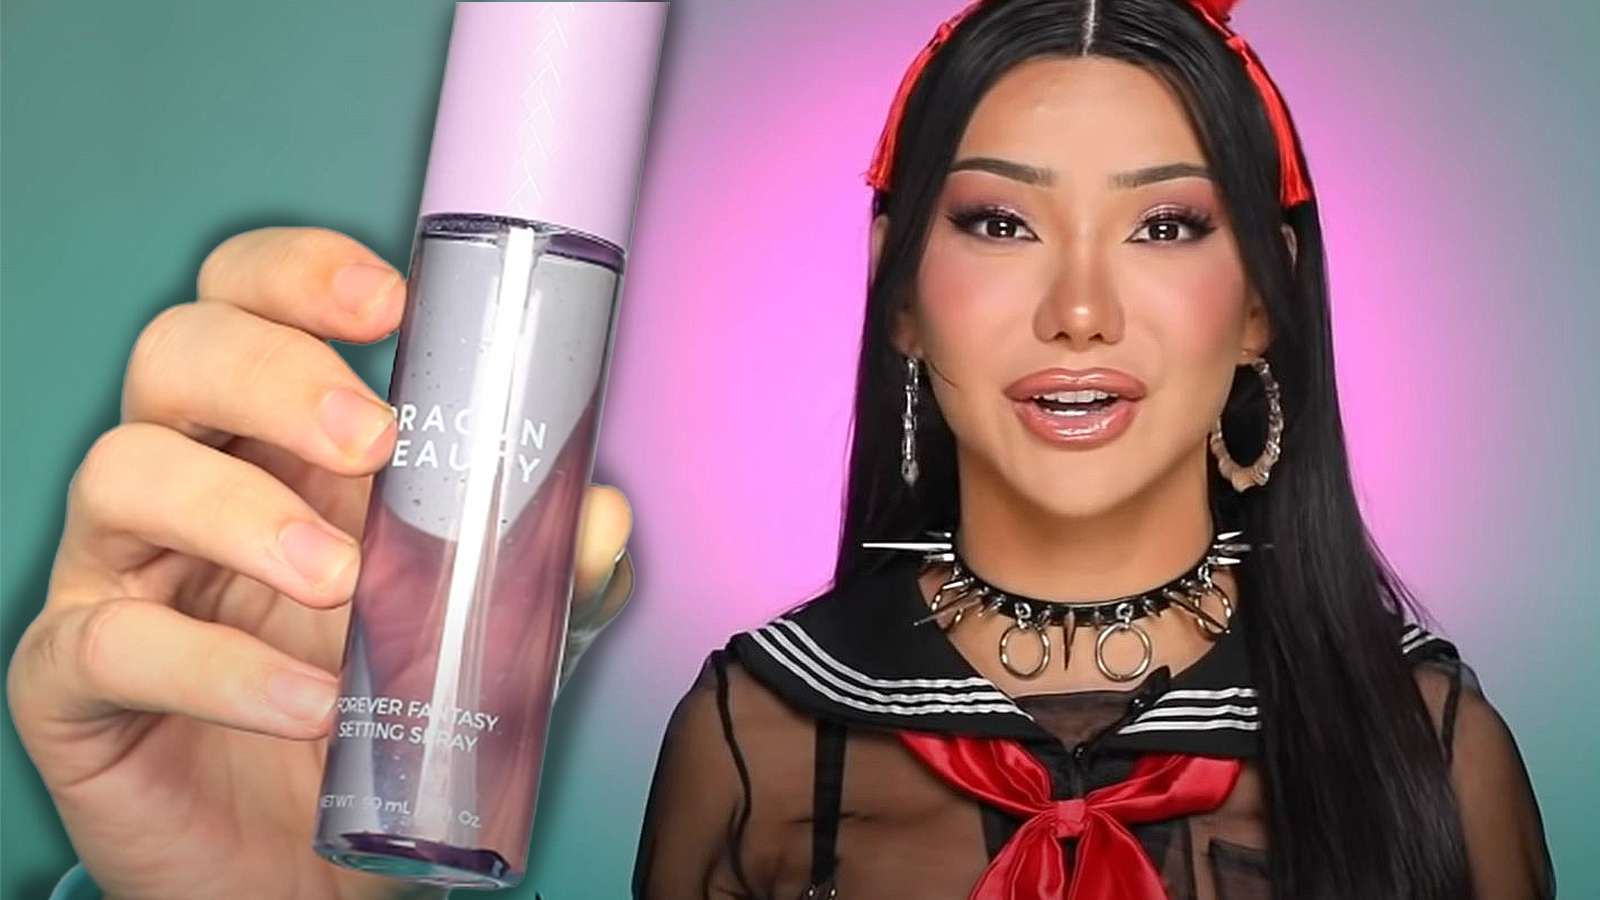 Nikita Dragun responds to claims of mold in her setting spray